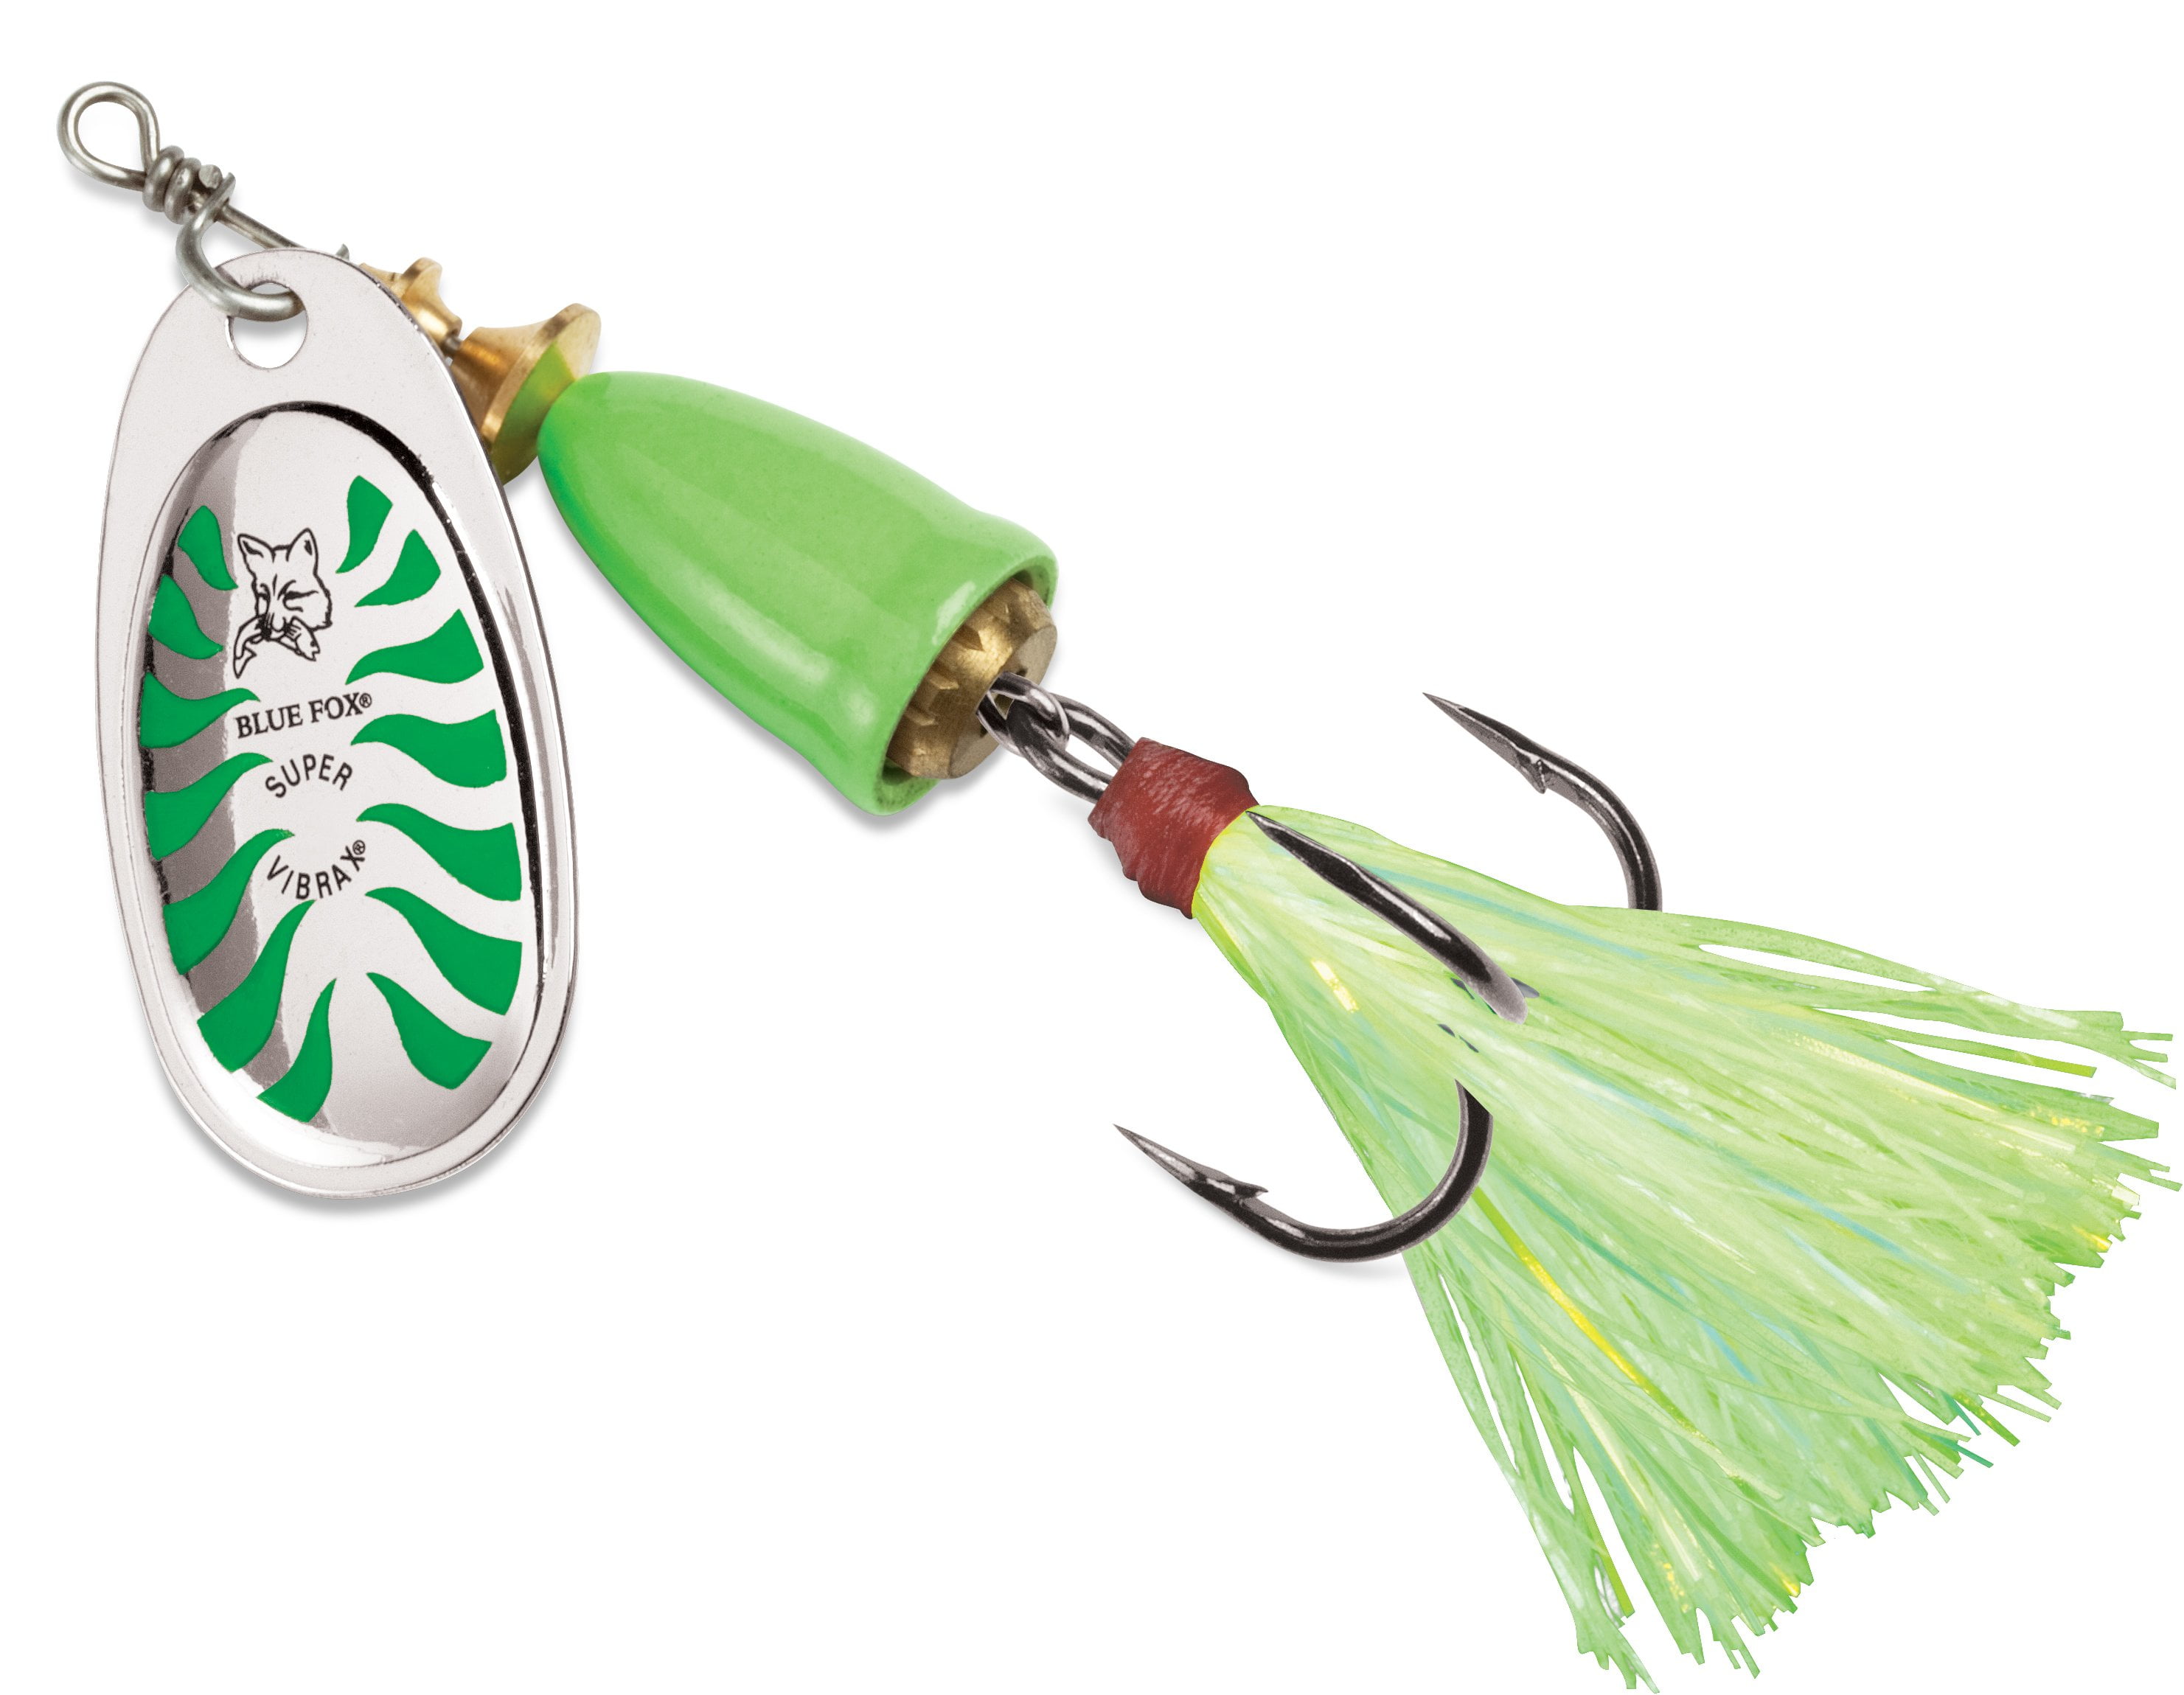 Blue Fox Classic Vibrax 02 Painted Tackle 